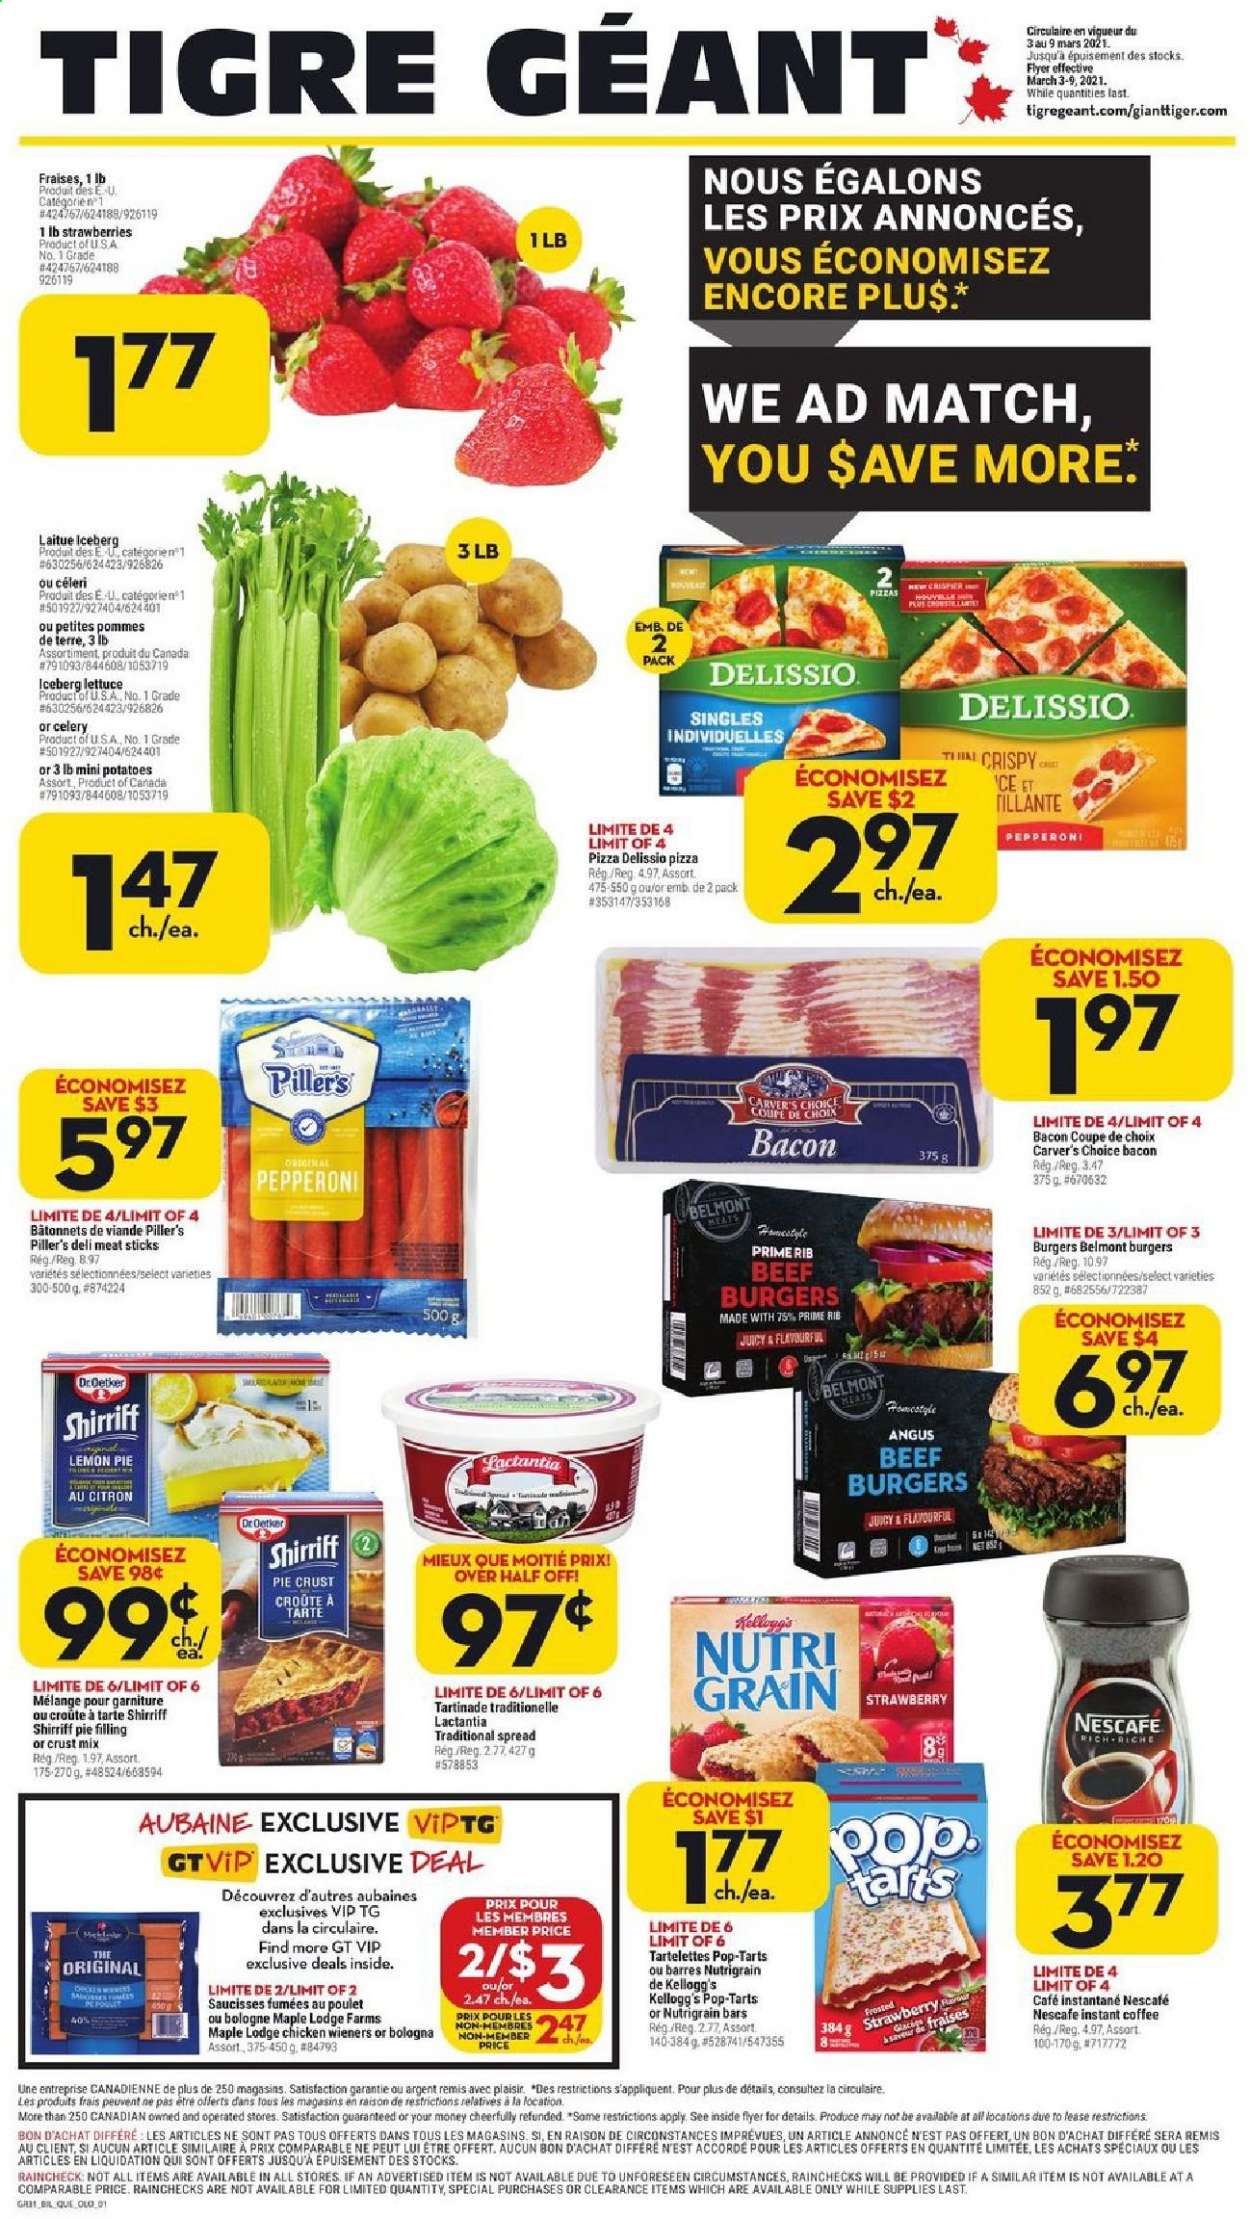 thumbnail - Giant Tiger Flyer - March 03, 2021 - March 09, 2021 - Sales products - potatoes, lettuce, strawberries, pizza, hamburger, beef burger, bacon, bologna sausage, pepperoni, Mars, Kellogg's, Pop-Tarts, pie crust, pie filling, Nutri-Grain, instant coffee, beef meat, Nescafé. Page 1.